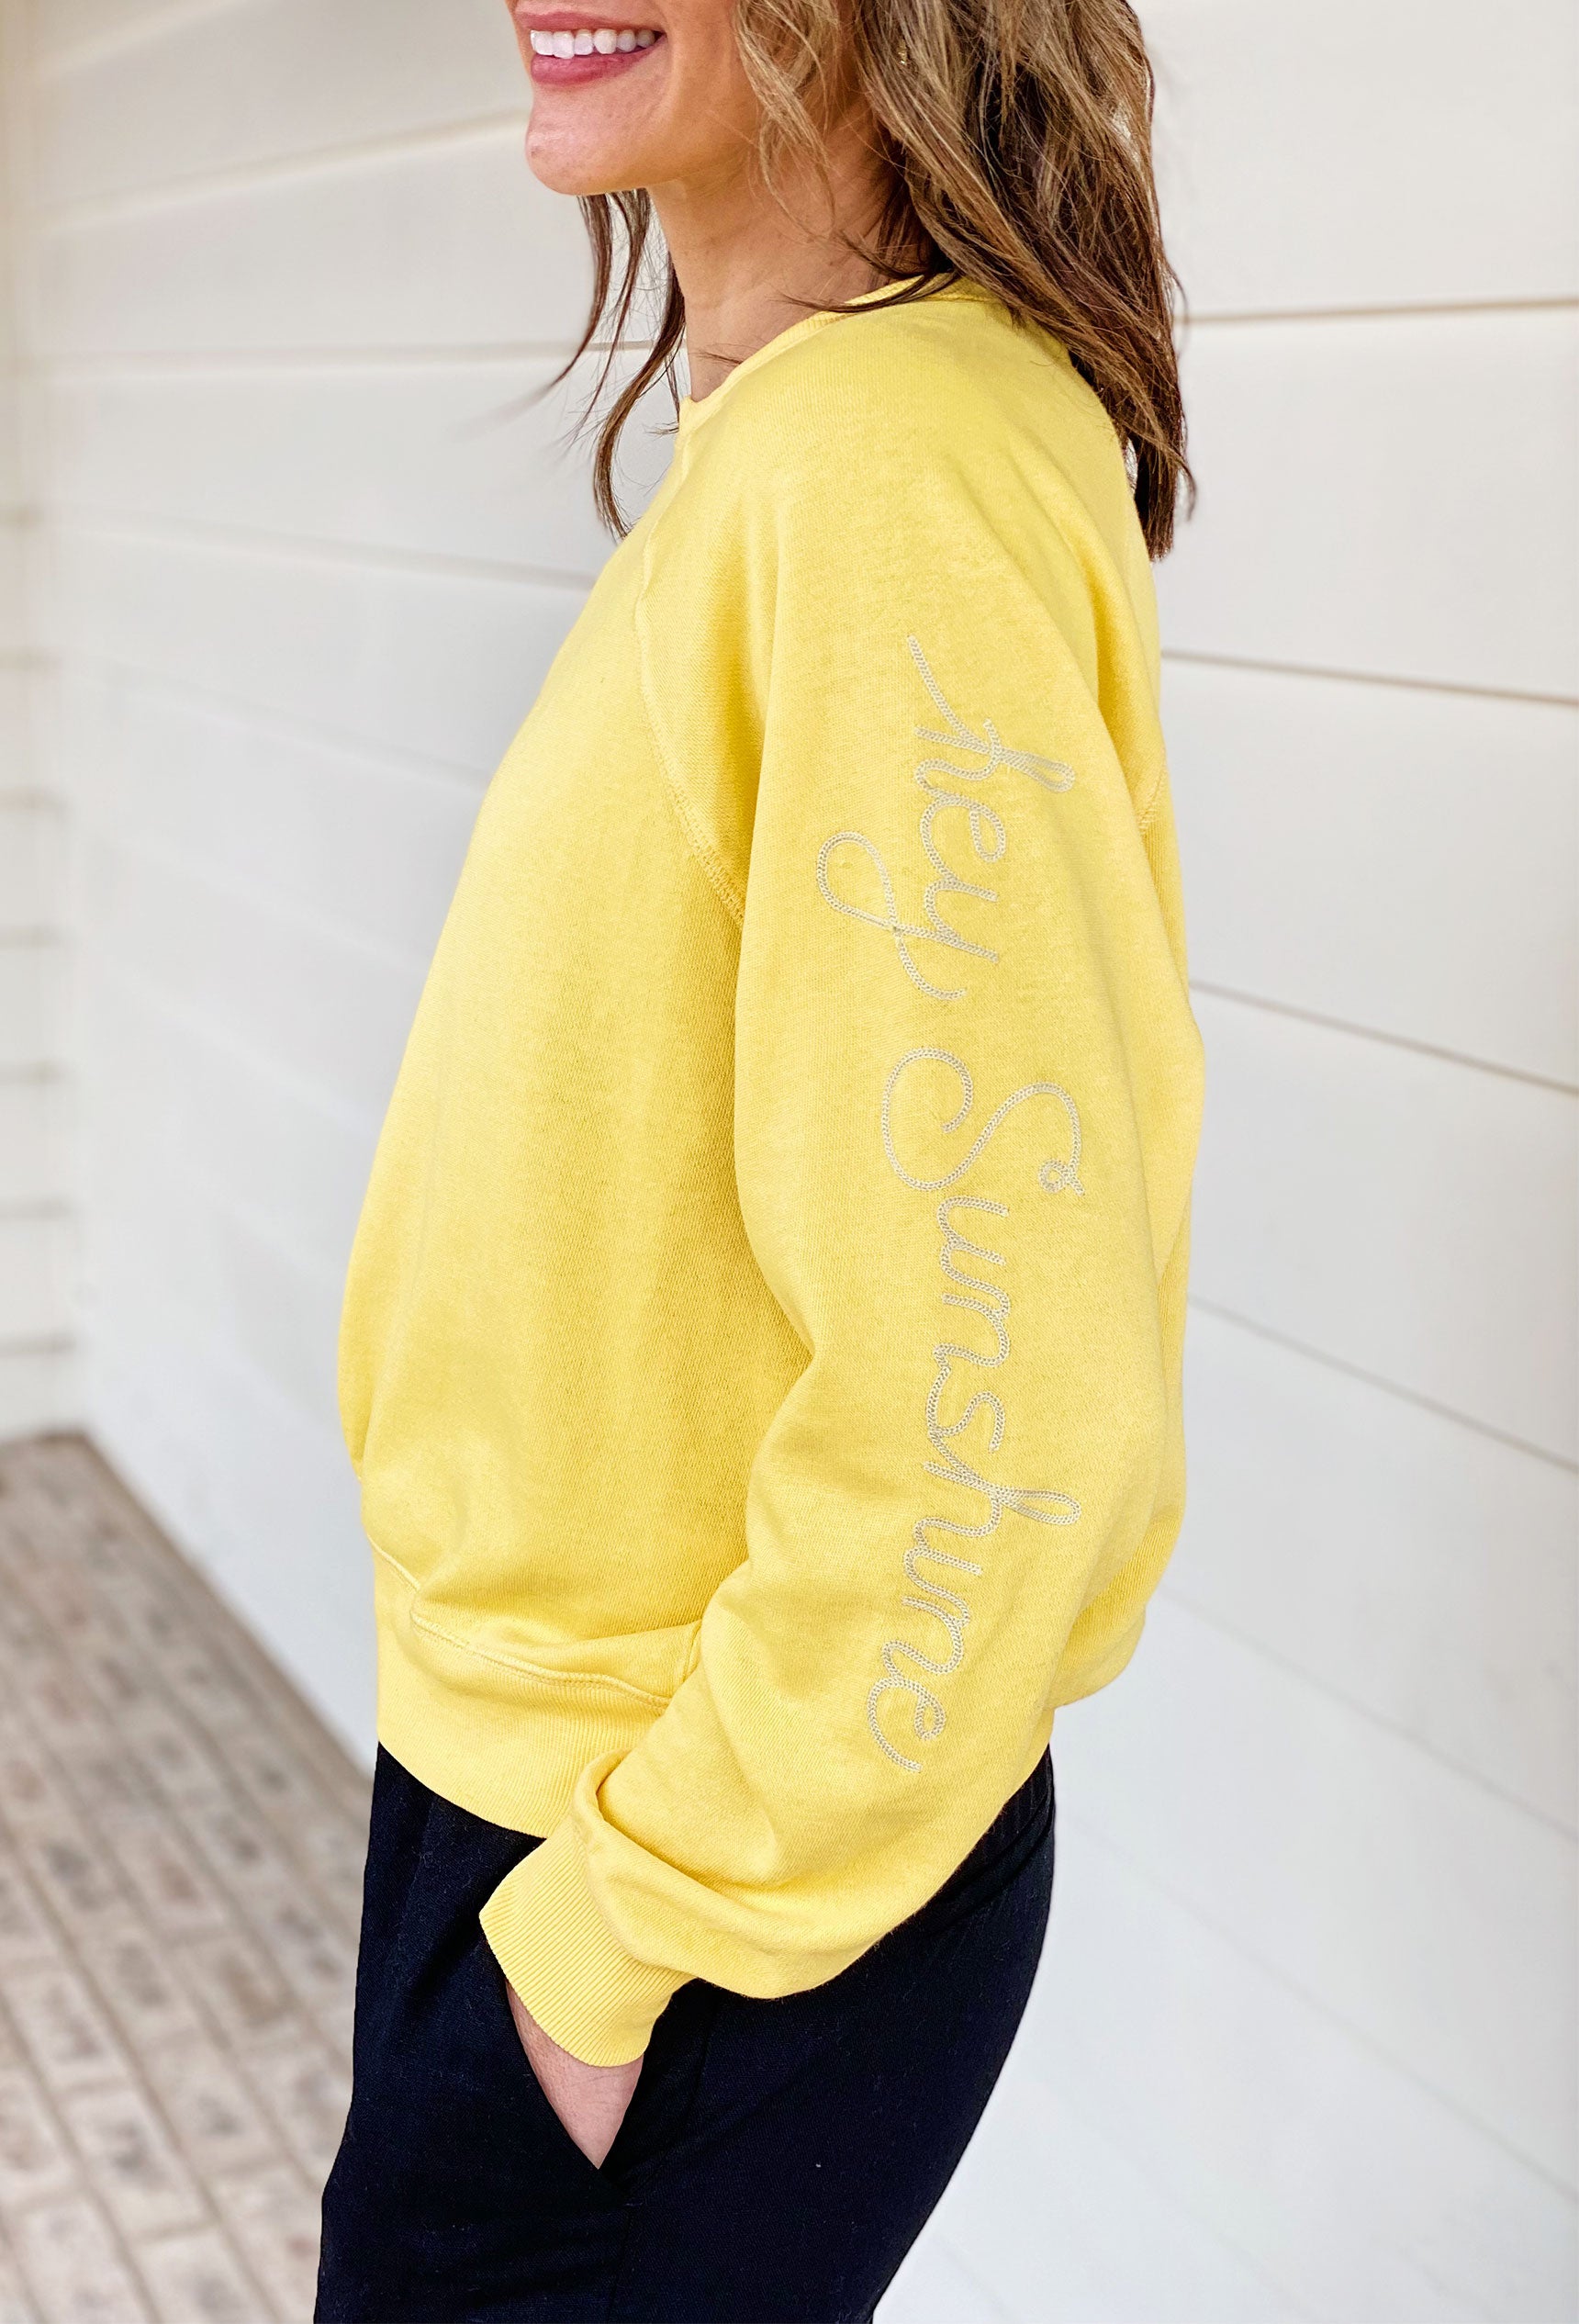 Z SUPPLY Vintage Statement Sweatshirt in Bright Sun, pullover with embroidered wording on the sleeve, embroidered sun detailing on the opposite sleeve